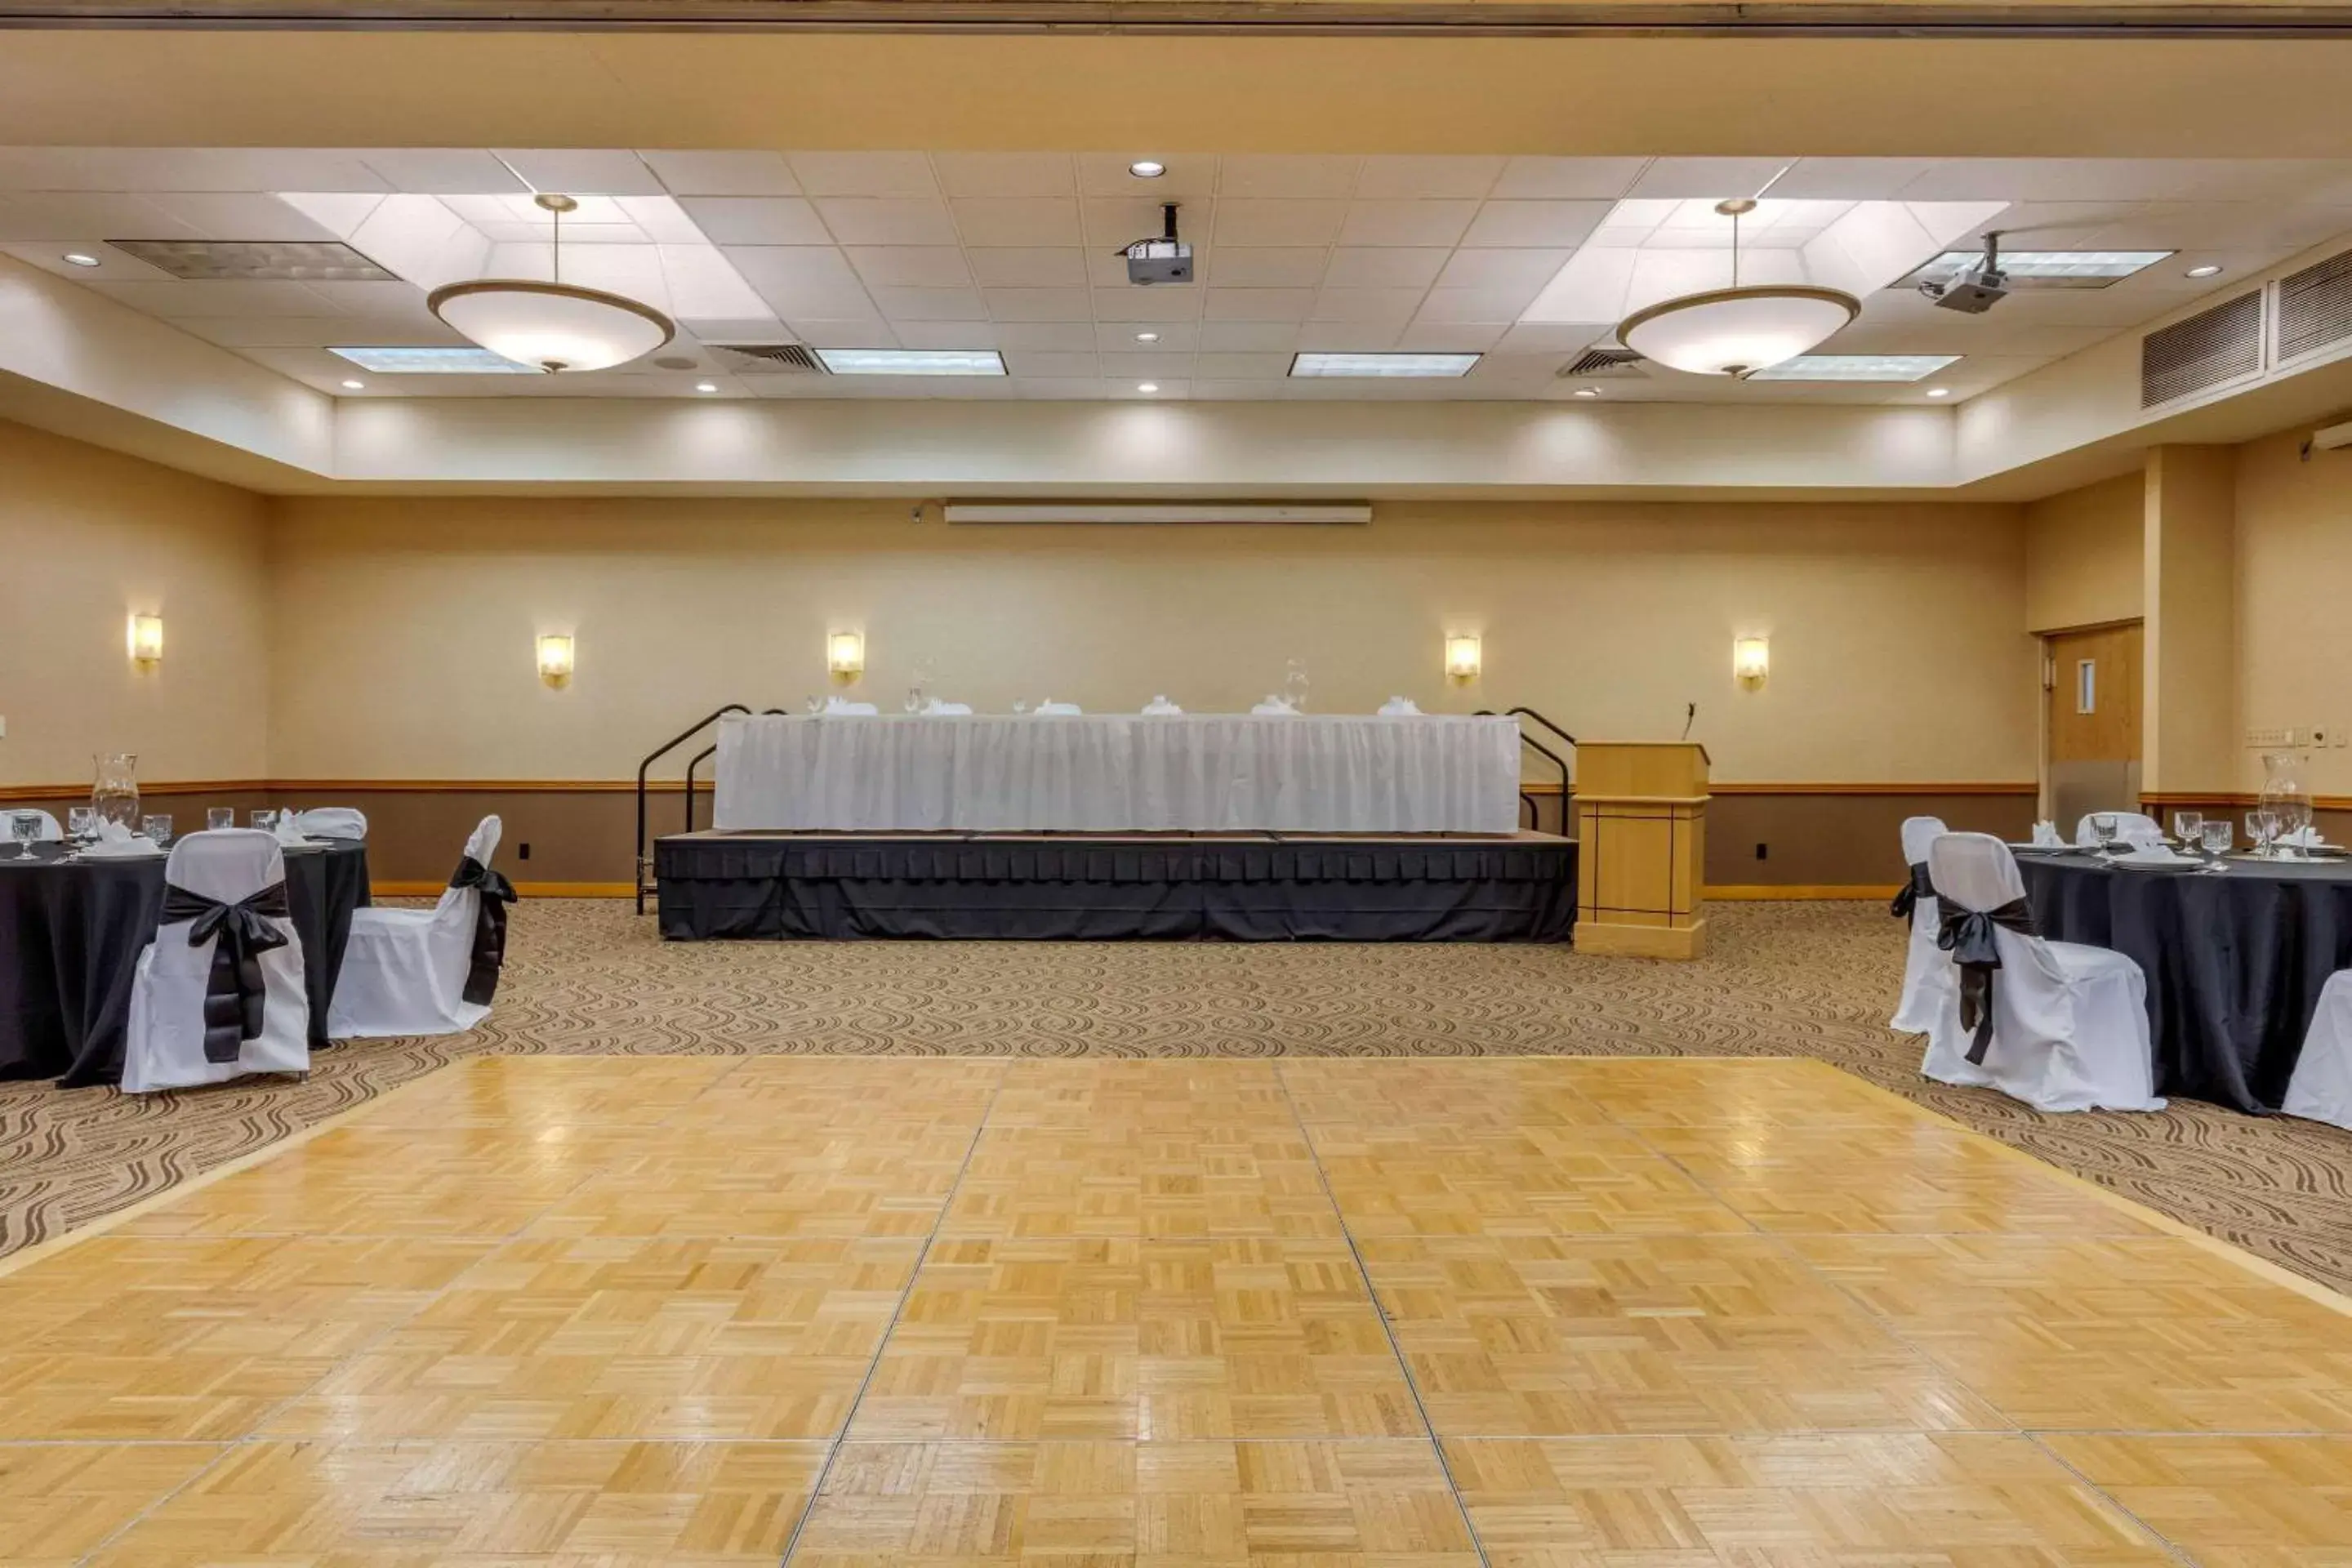 On site, Banquet Facilities in Quality Inn Exit 4 Clarksville